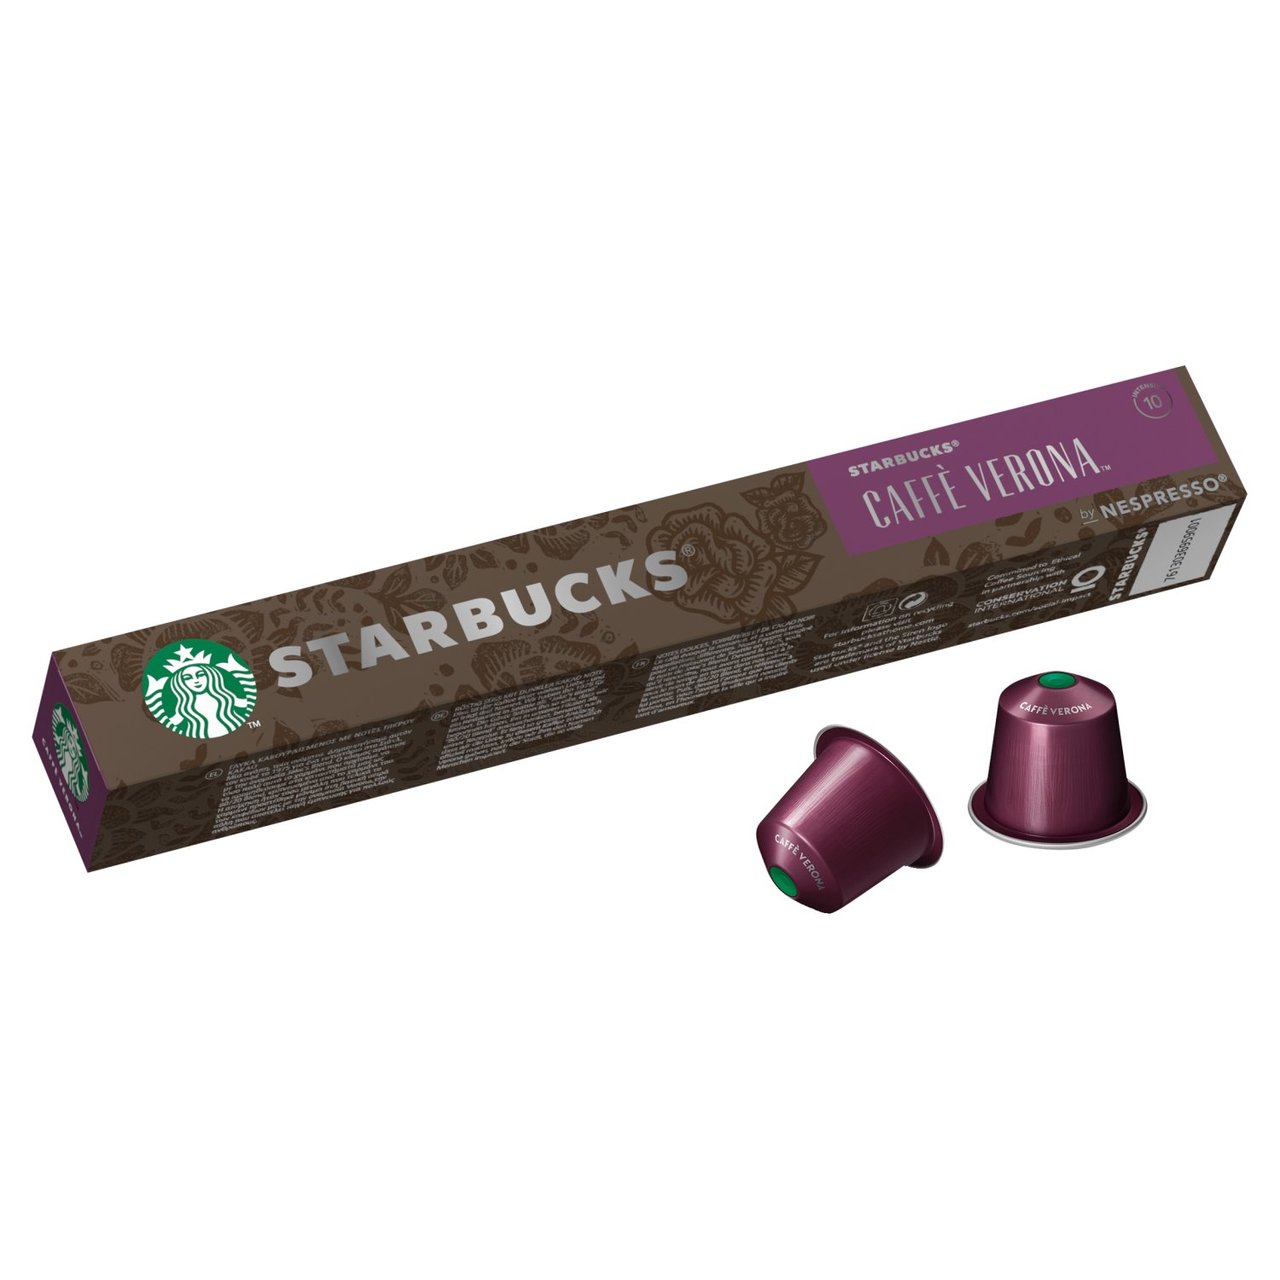 Nespresso Starbucks Caffe Verona 10 Coffee Pods RRP 3.50 CLEARANCE XL 1.99 or 3 for 4.98